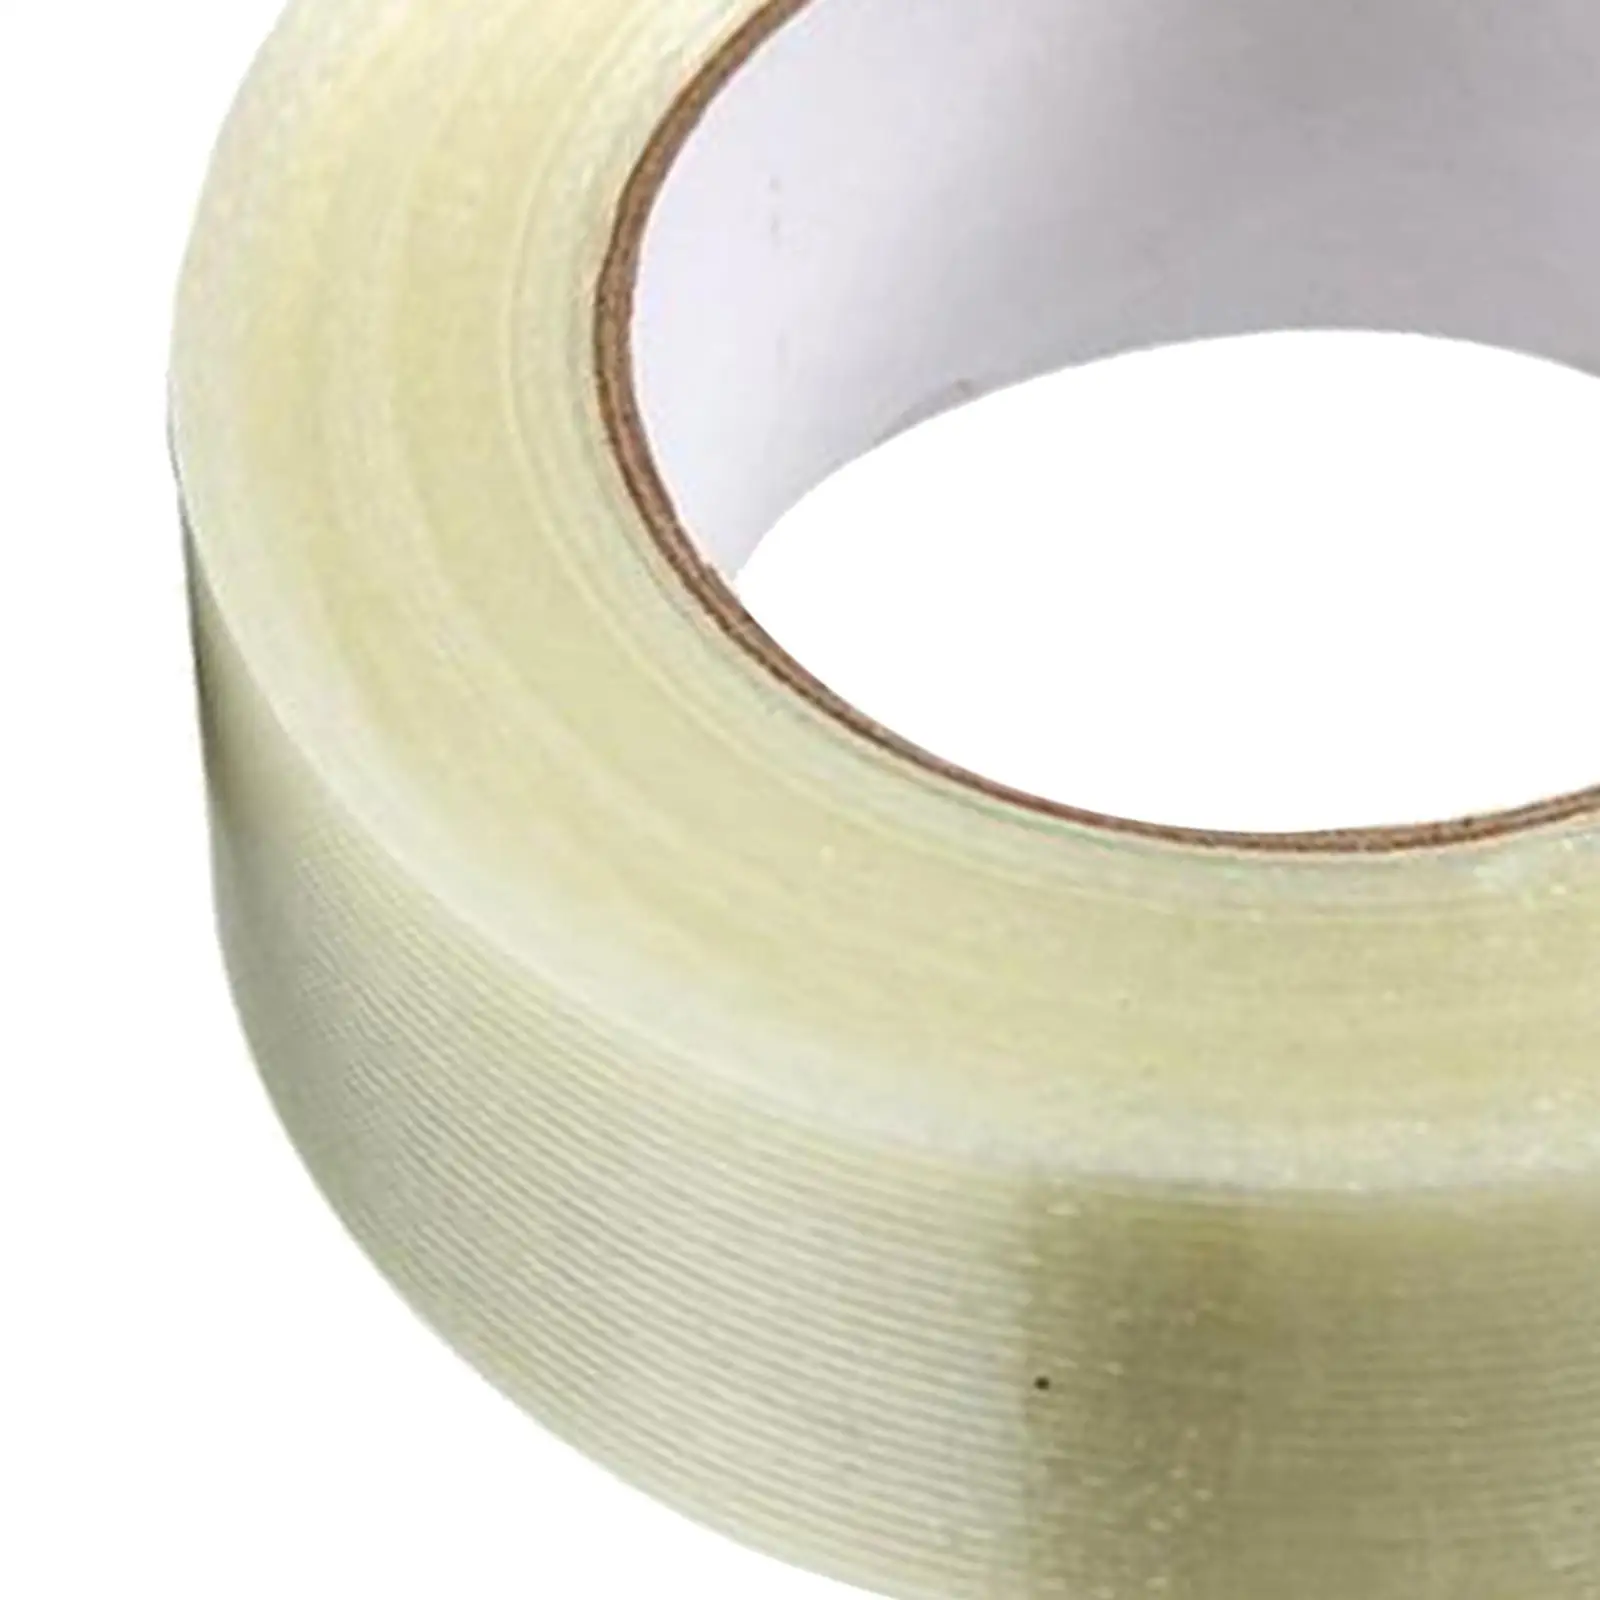 60Yards Wig Tape Roll Hair Toupee Tape Hairpiece Bonding Tape for Hair Replacement